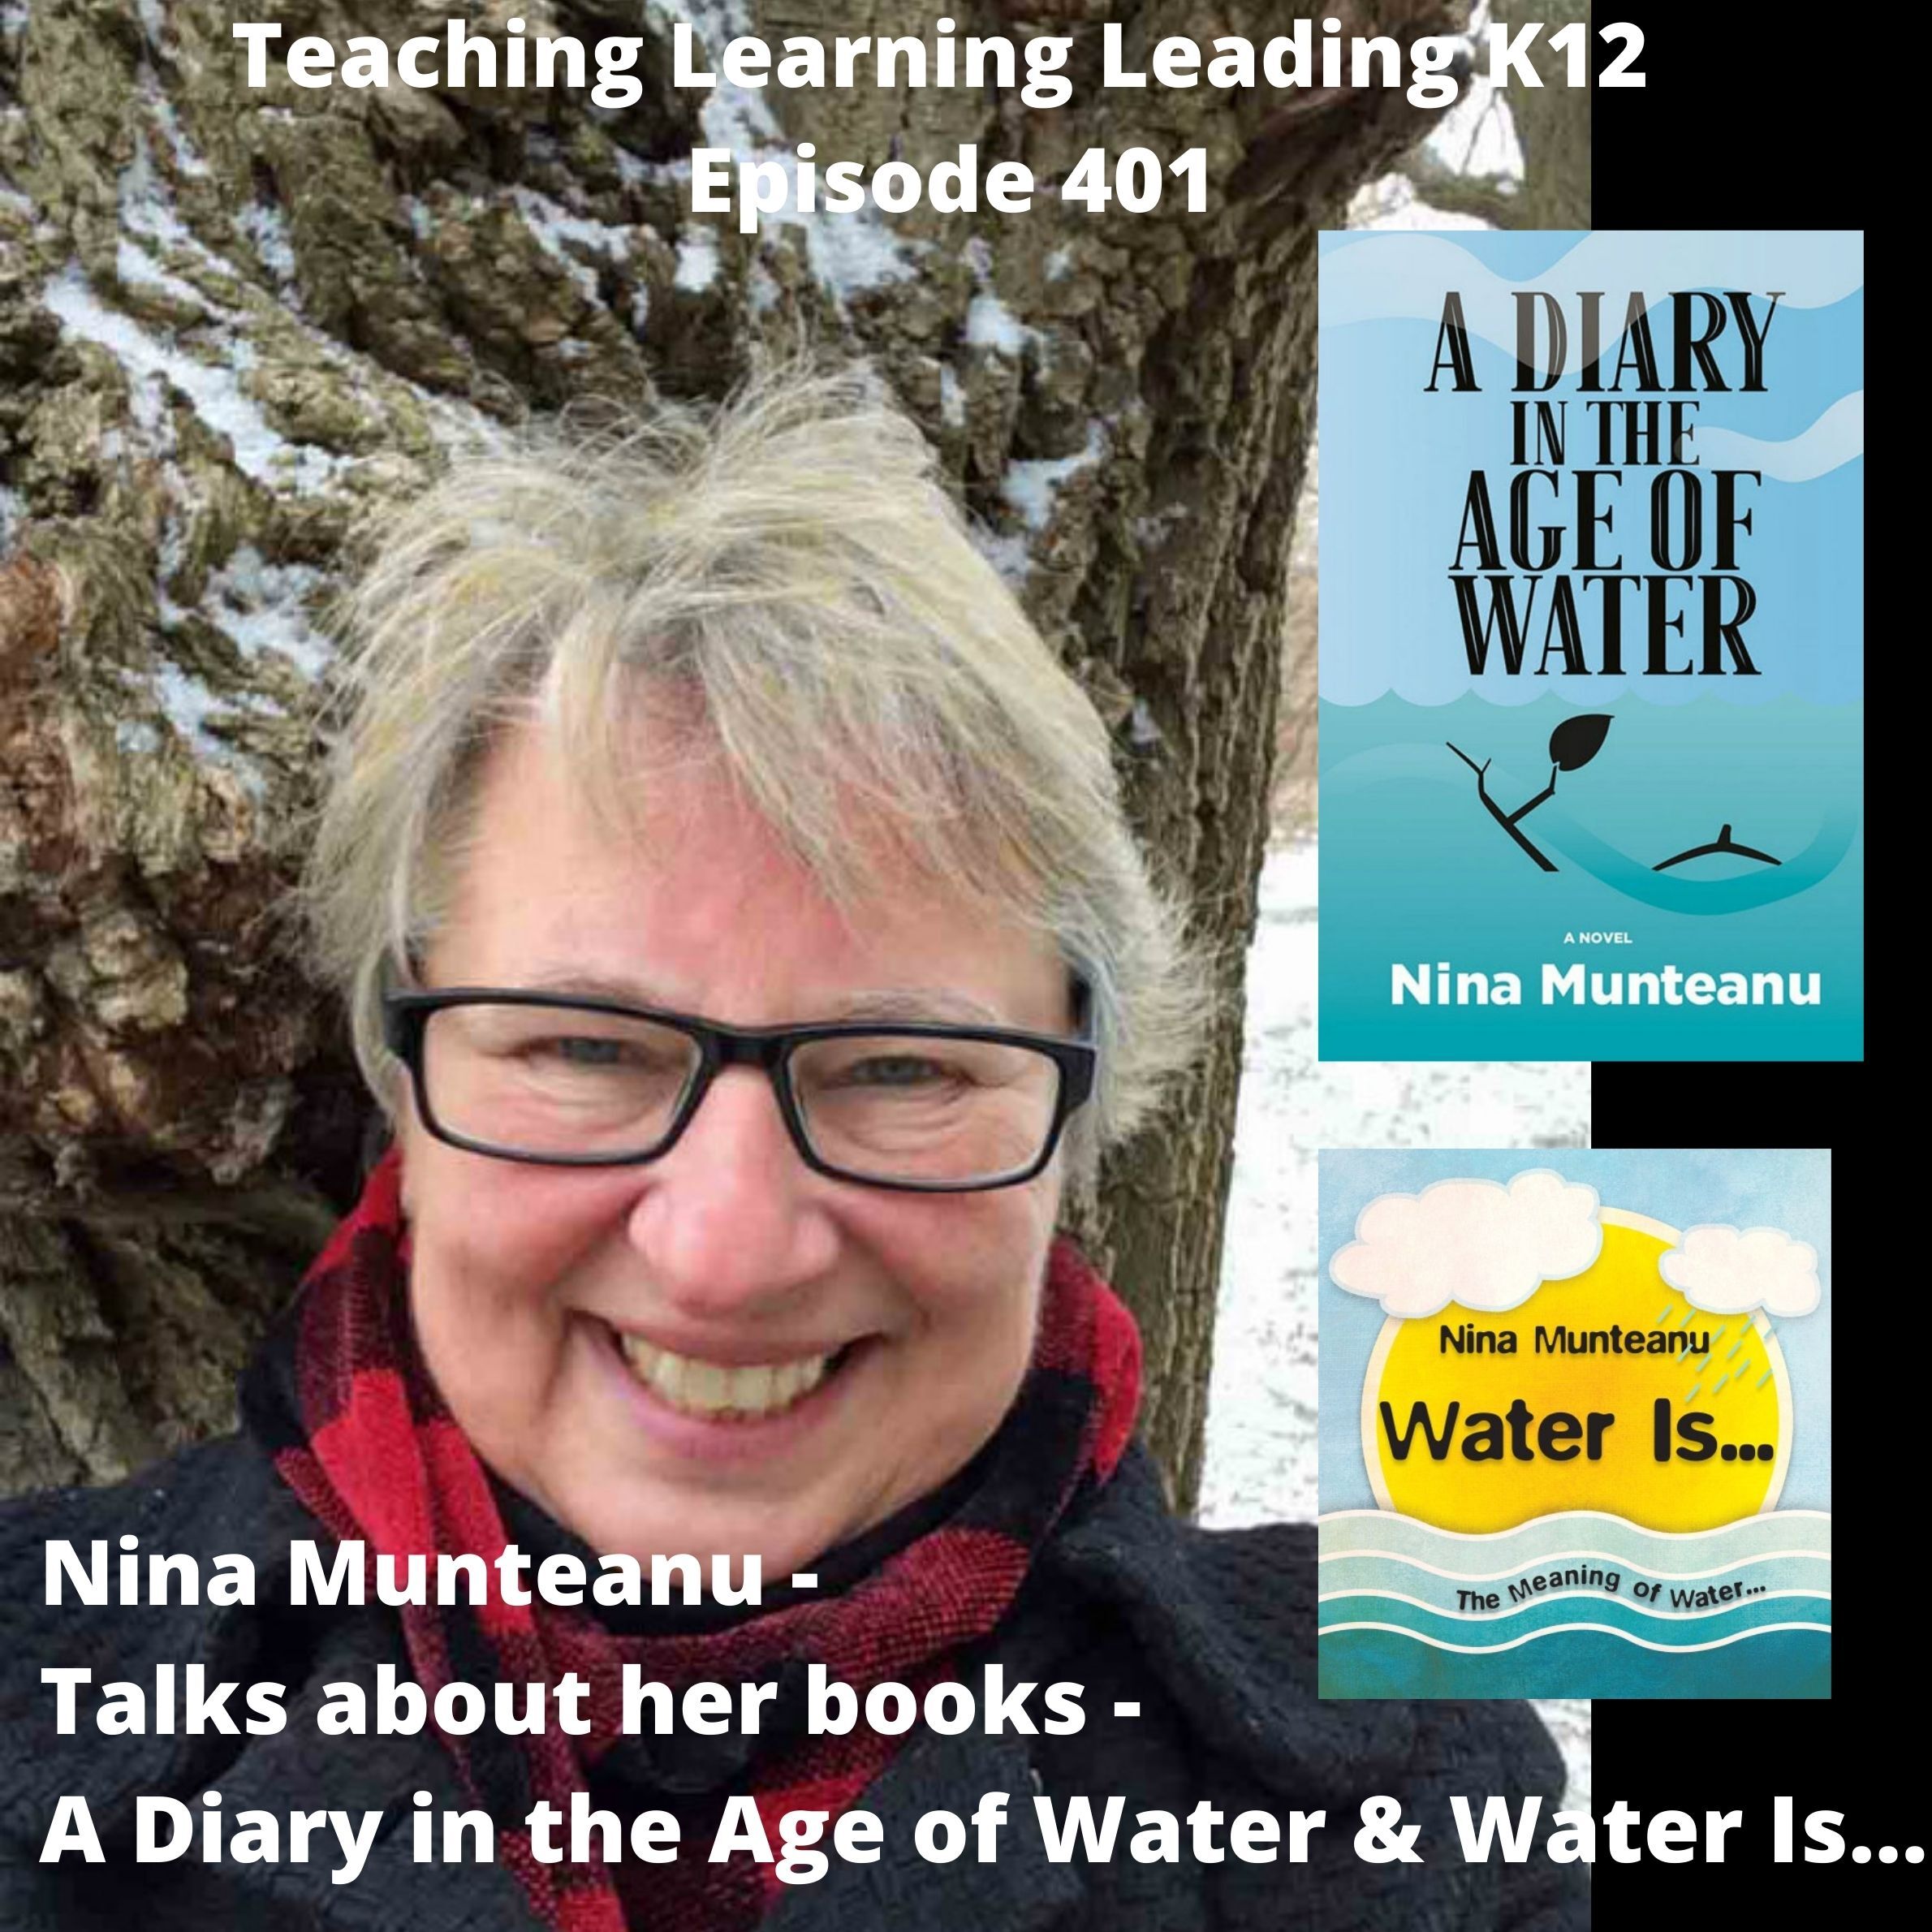 Nina Munteanu - Diary in the Age of Water & Water Is... 401 Image